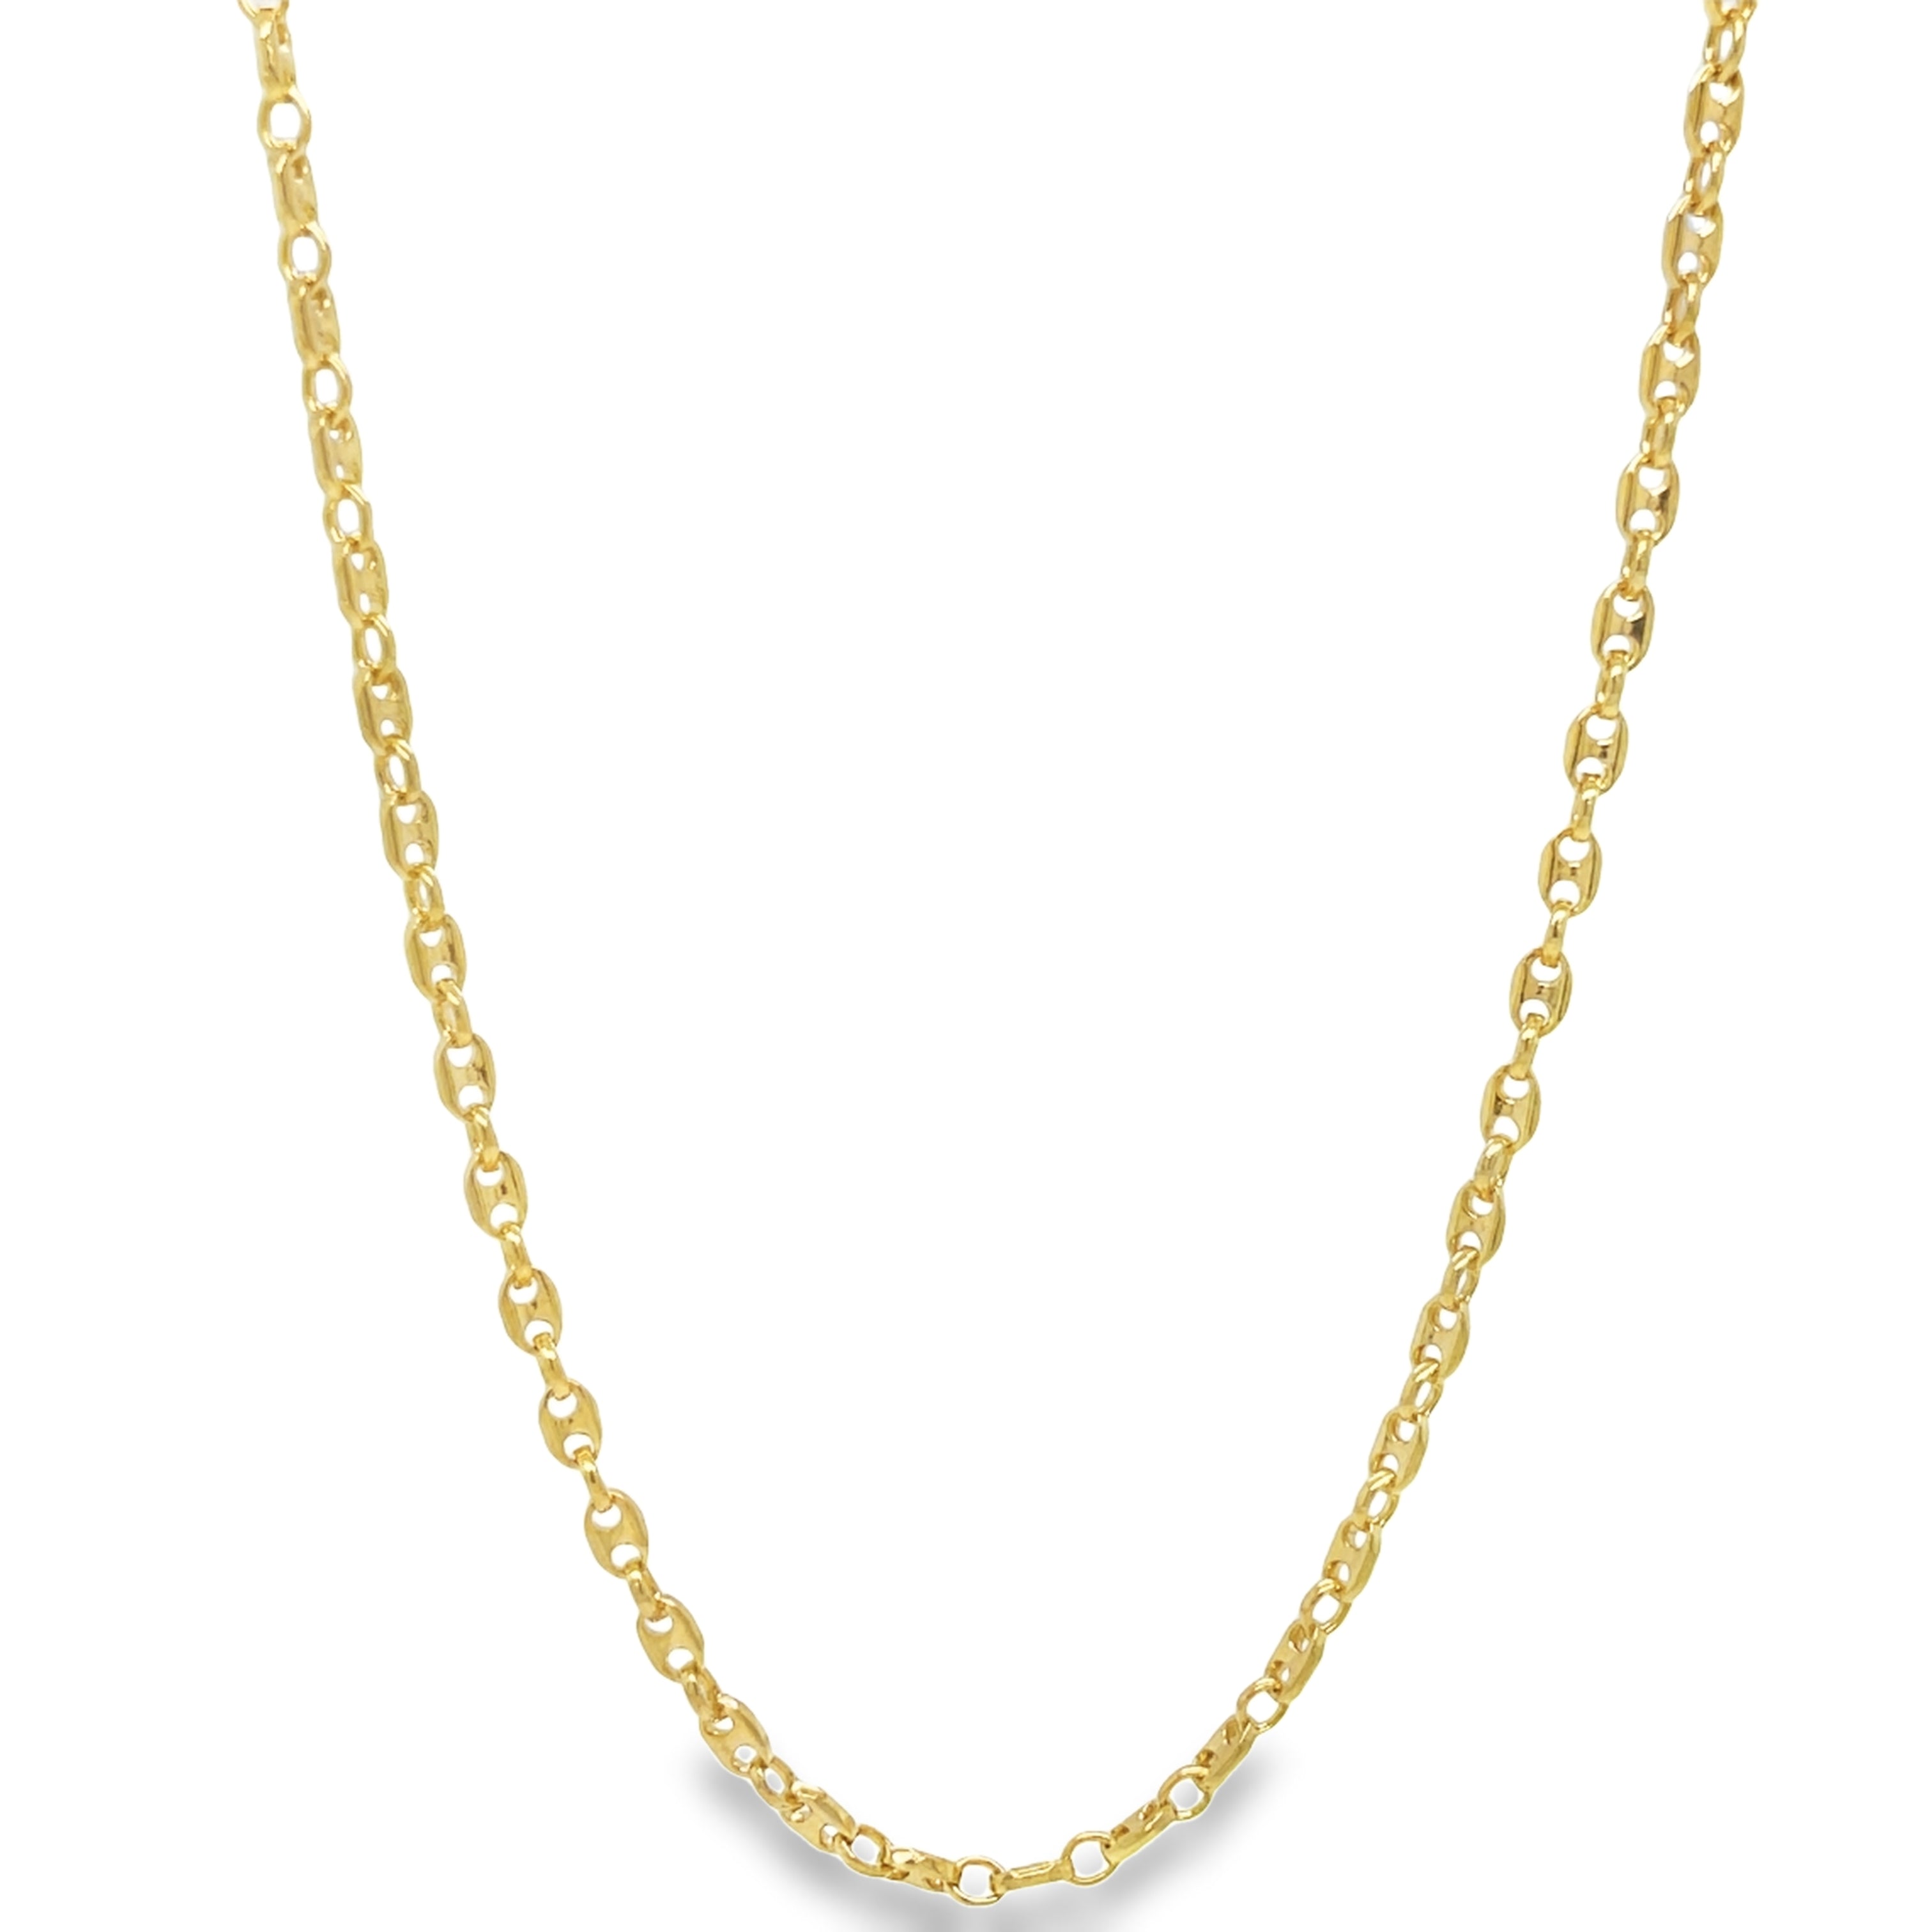 <p><span style="font-size: 0.875rem;">This classic 14K yellow gold mini mariner link necklace measures 16" in length and 2.50 mm in thickness. It also features a lobster catch for secure fastening. It ensures a timeless and long-lasting look.</span></p> <p>&nbsp;</p>